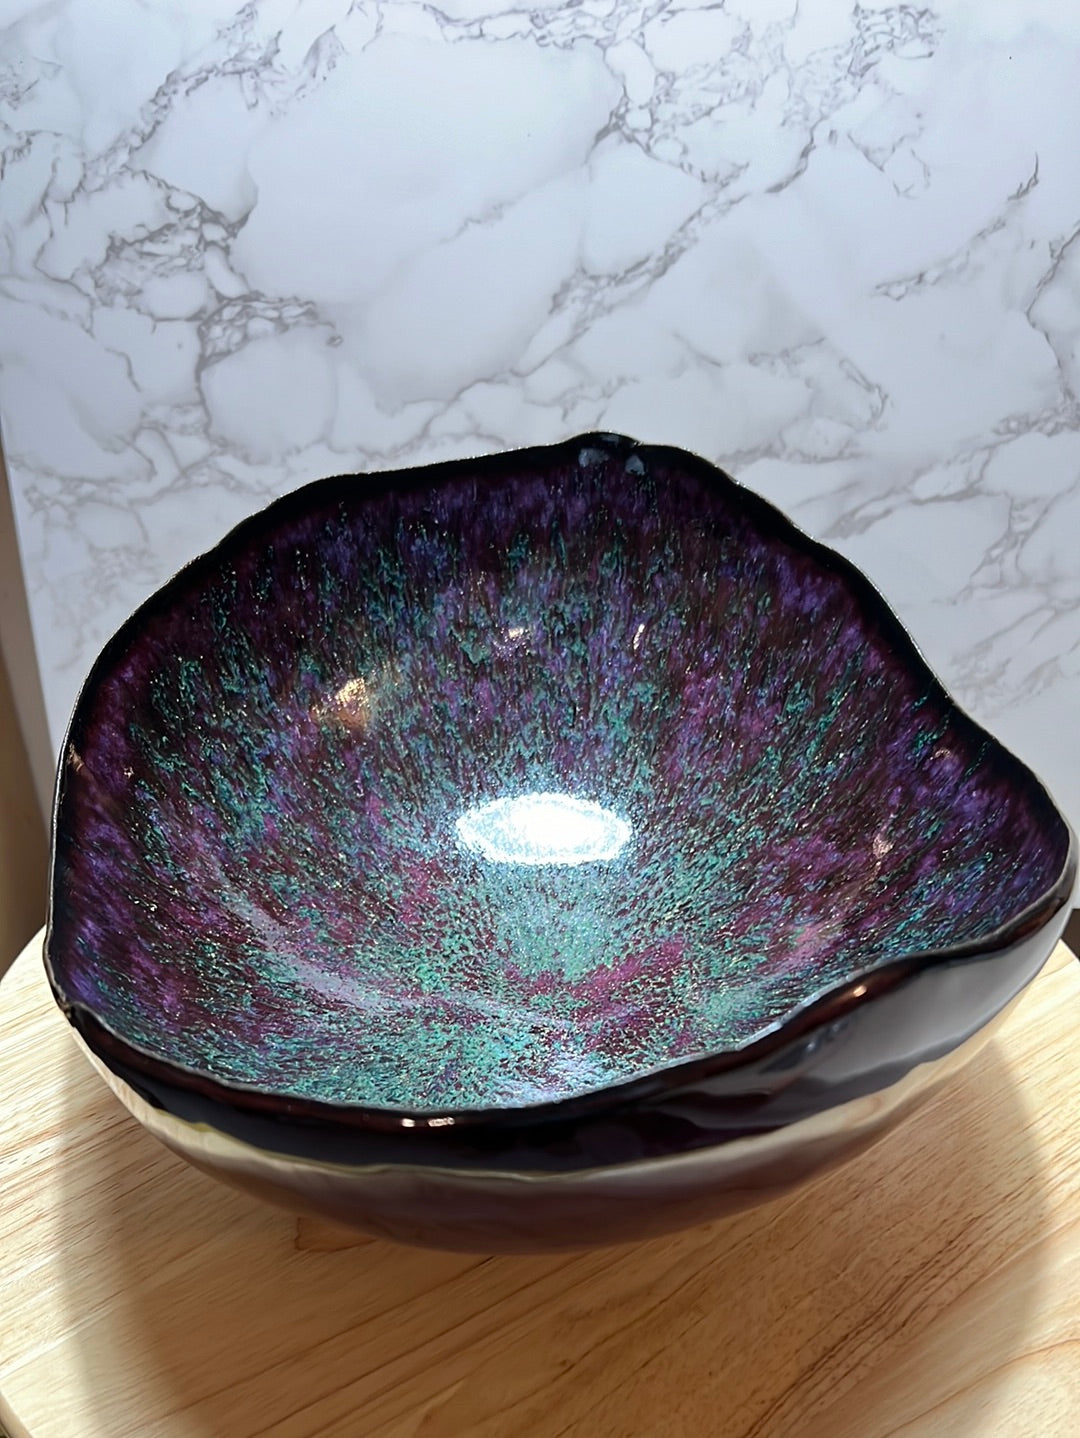 Centerpiece Serving Bowl | ROCK HOME Collection | 12” long x 10” wide x 6” tall